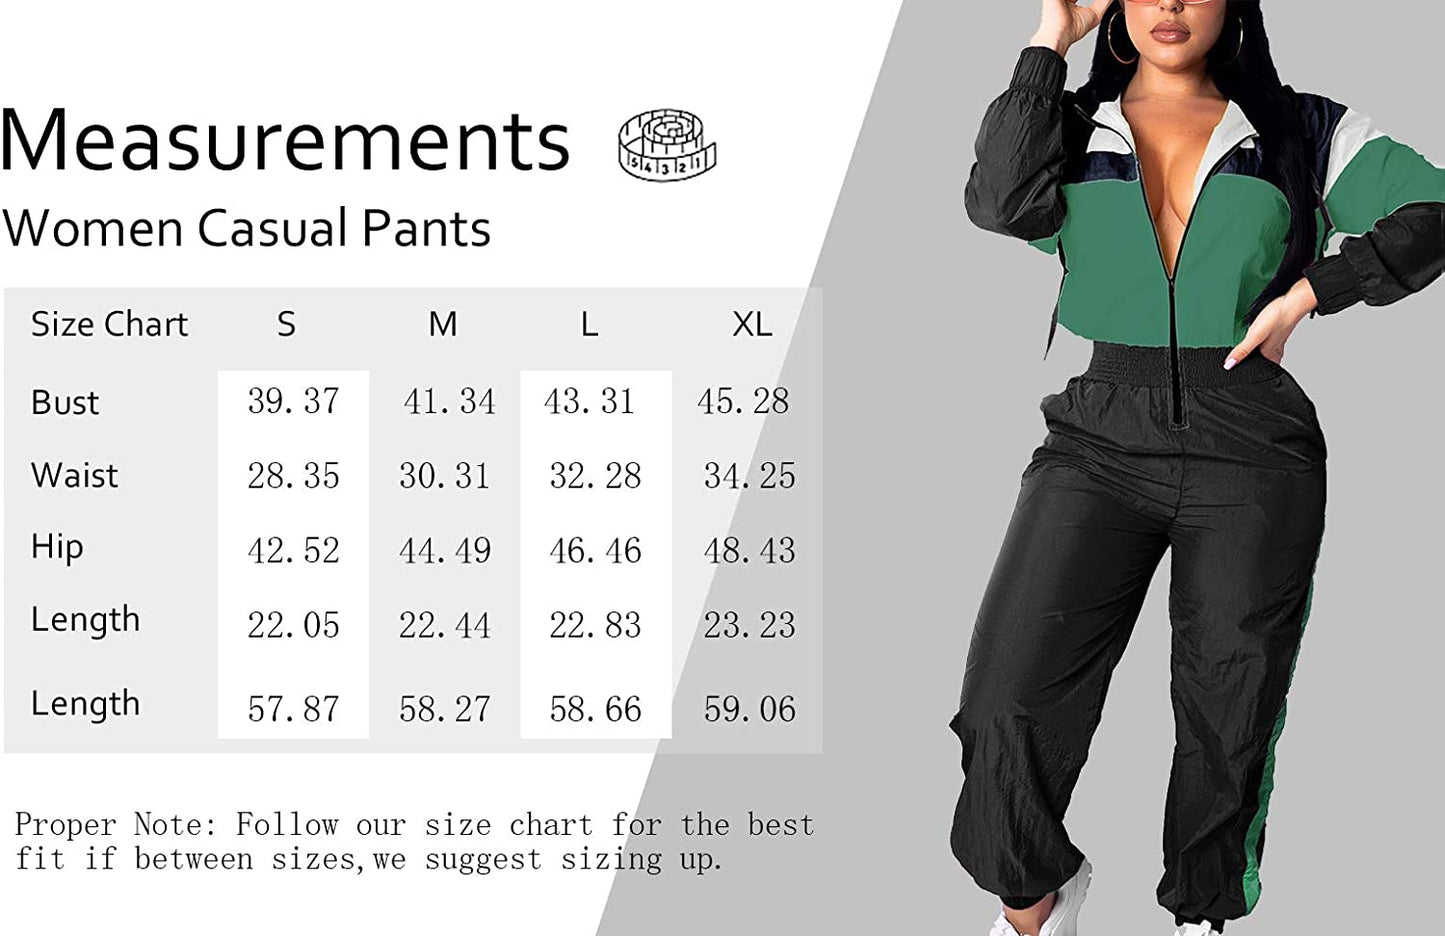 "Elegant Colorblock One Piece Outfit - Enhance your Style with this High Waist Pants Long Sleeve Jumpsuit"